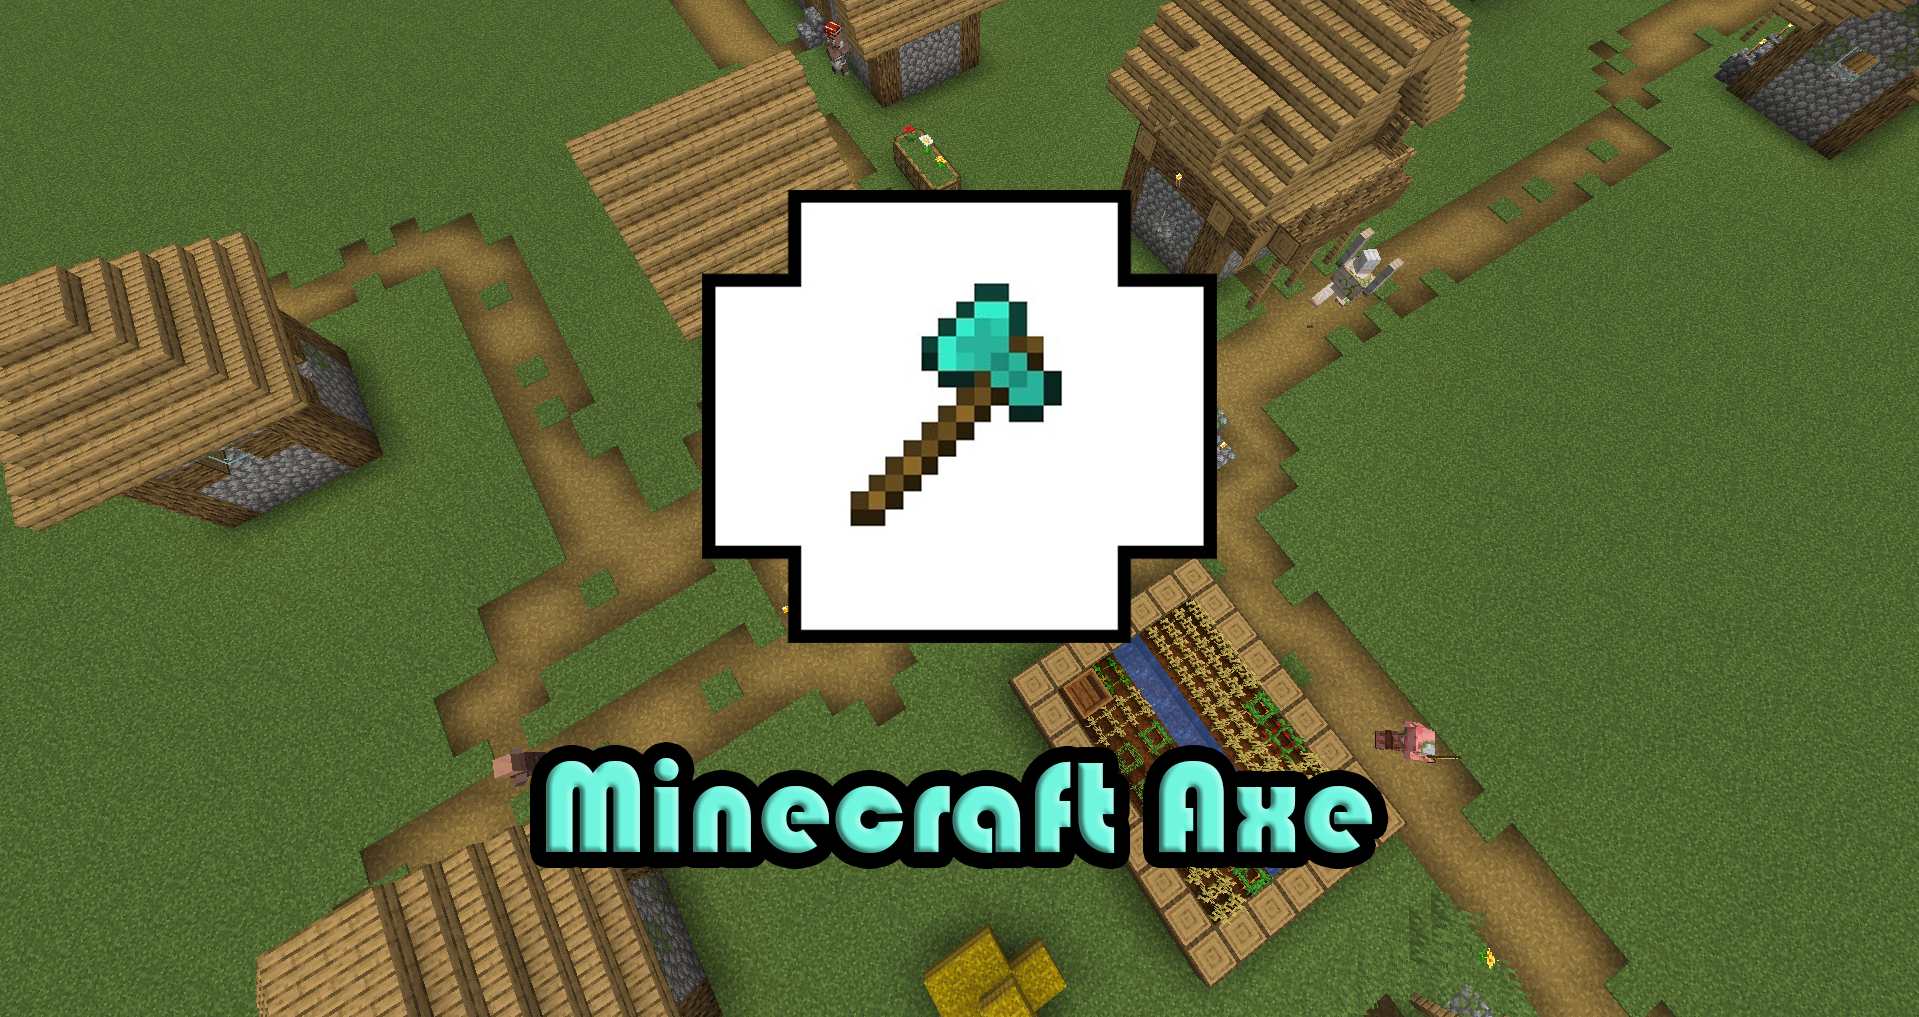 How To Use An Axe in Minecraft